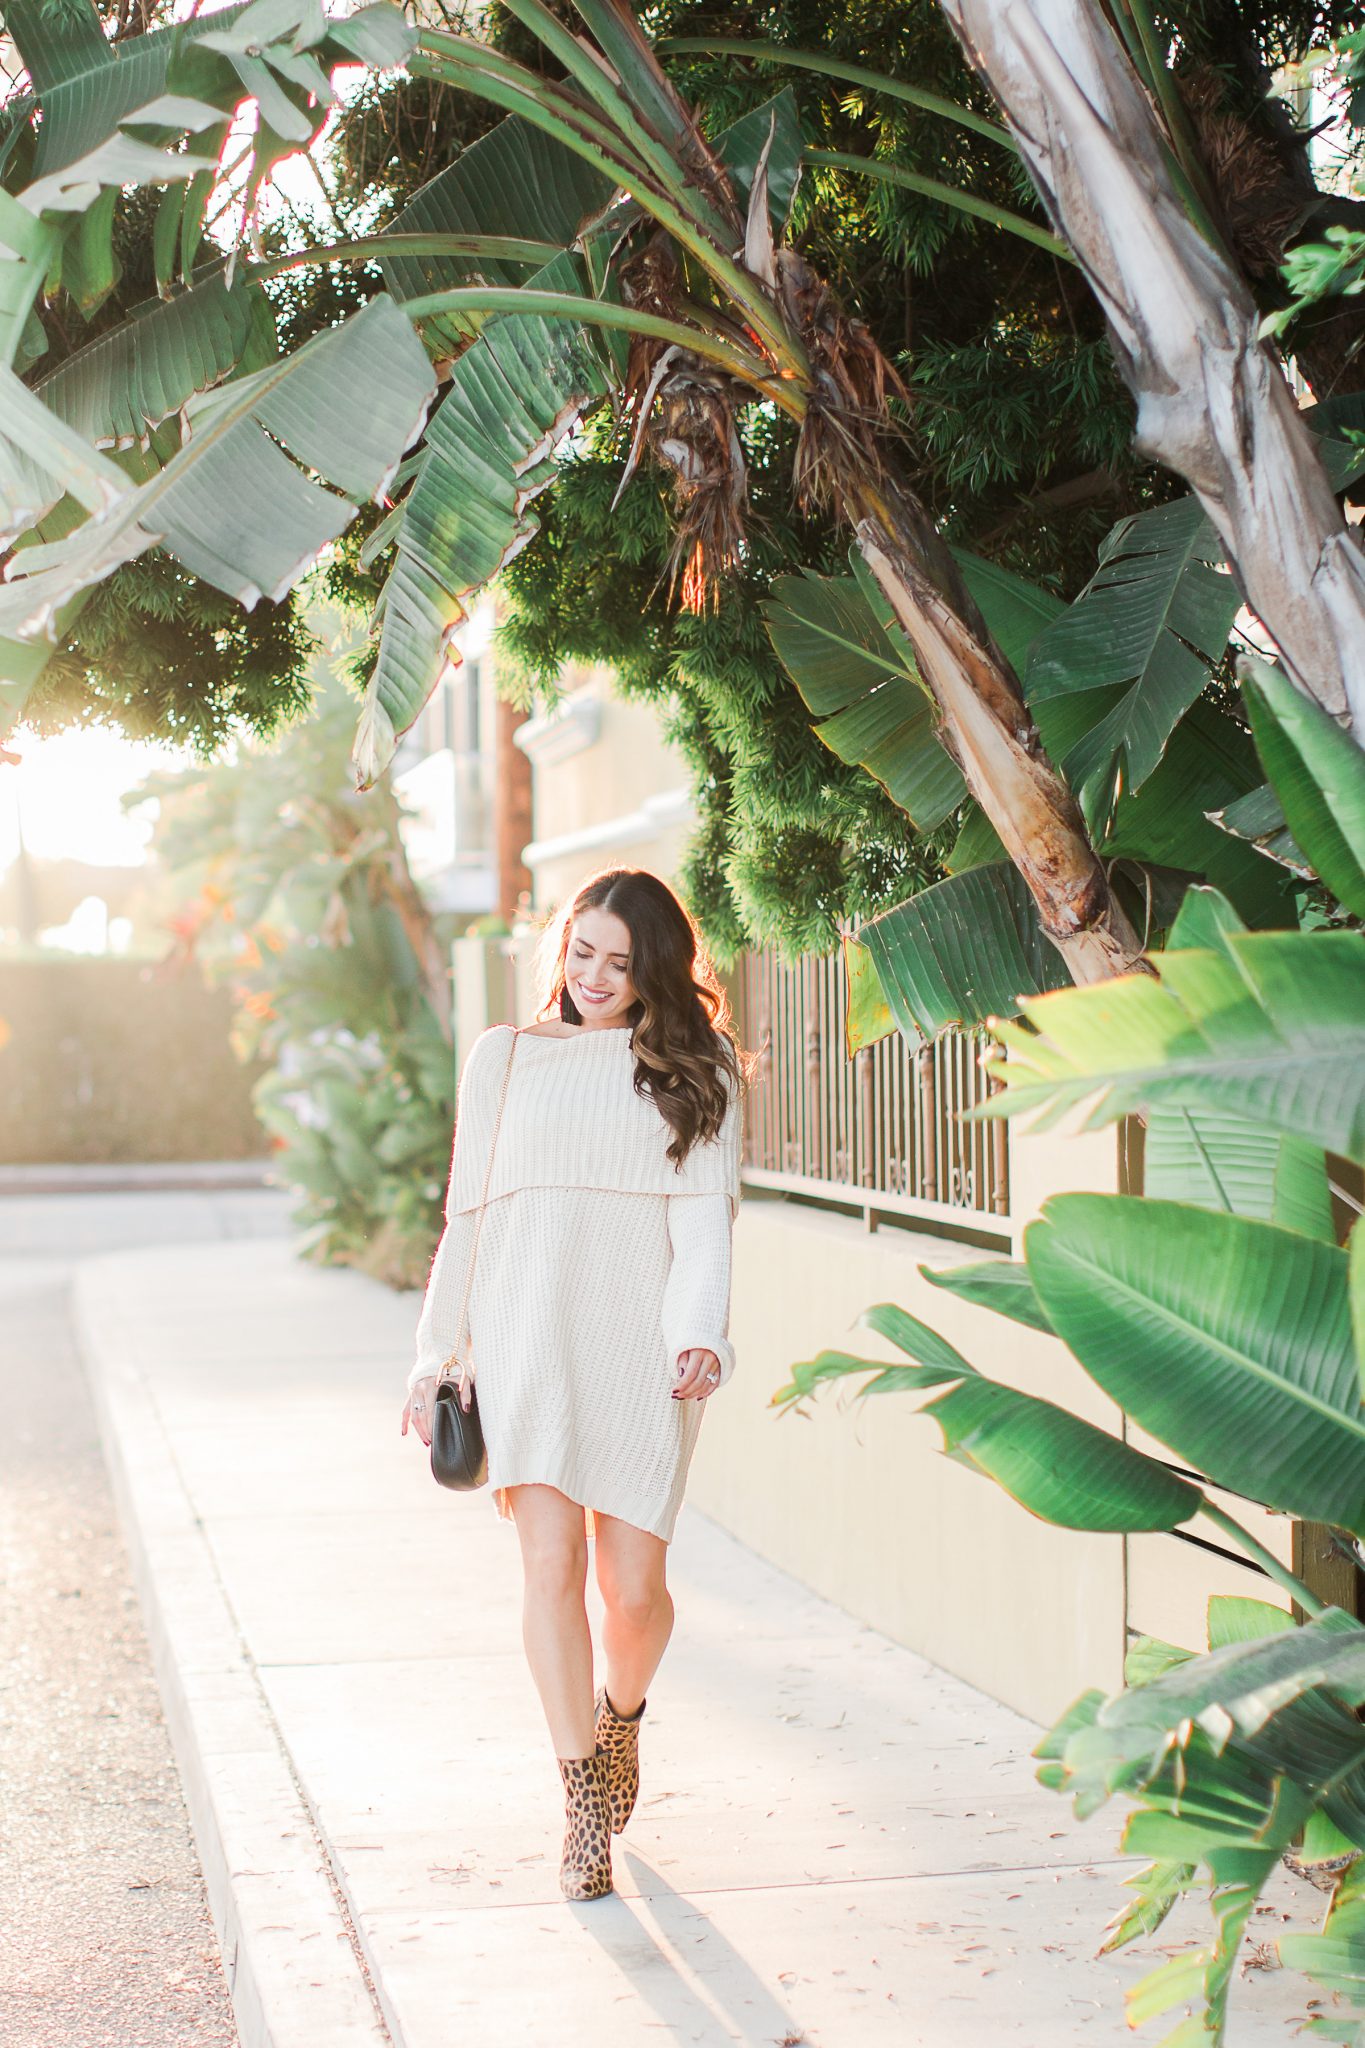 Sweater Dress with Leopard Booties - Holiday Cream Sweater Dress with The Mint Julep Boutique by popular Orange County fashion blogger Maxie Elle